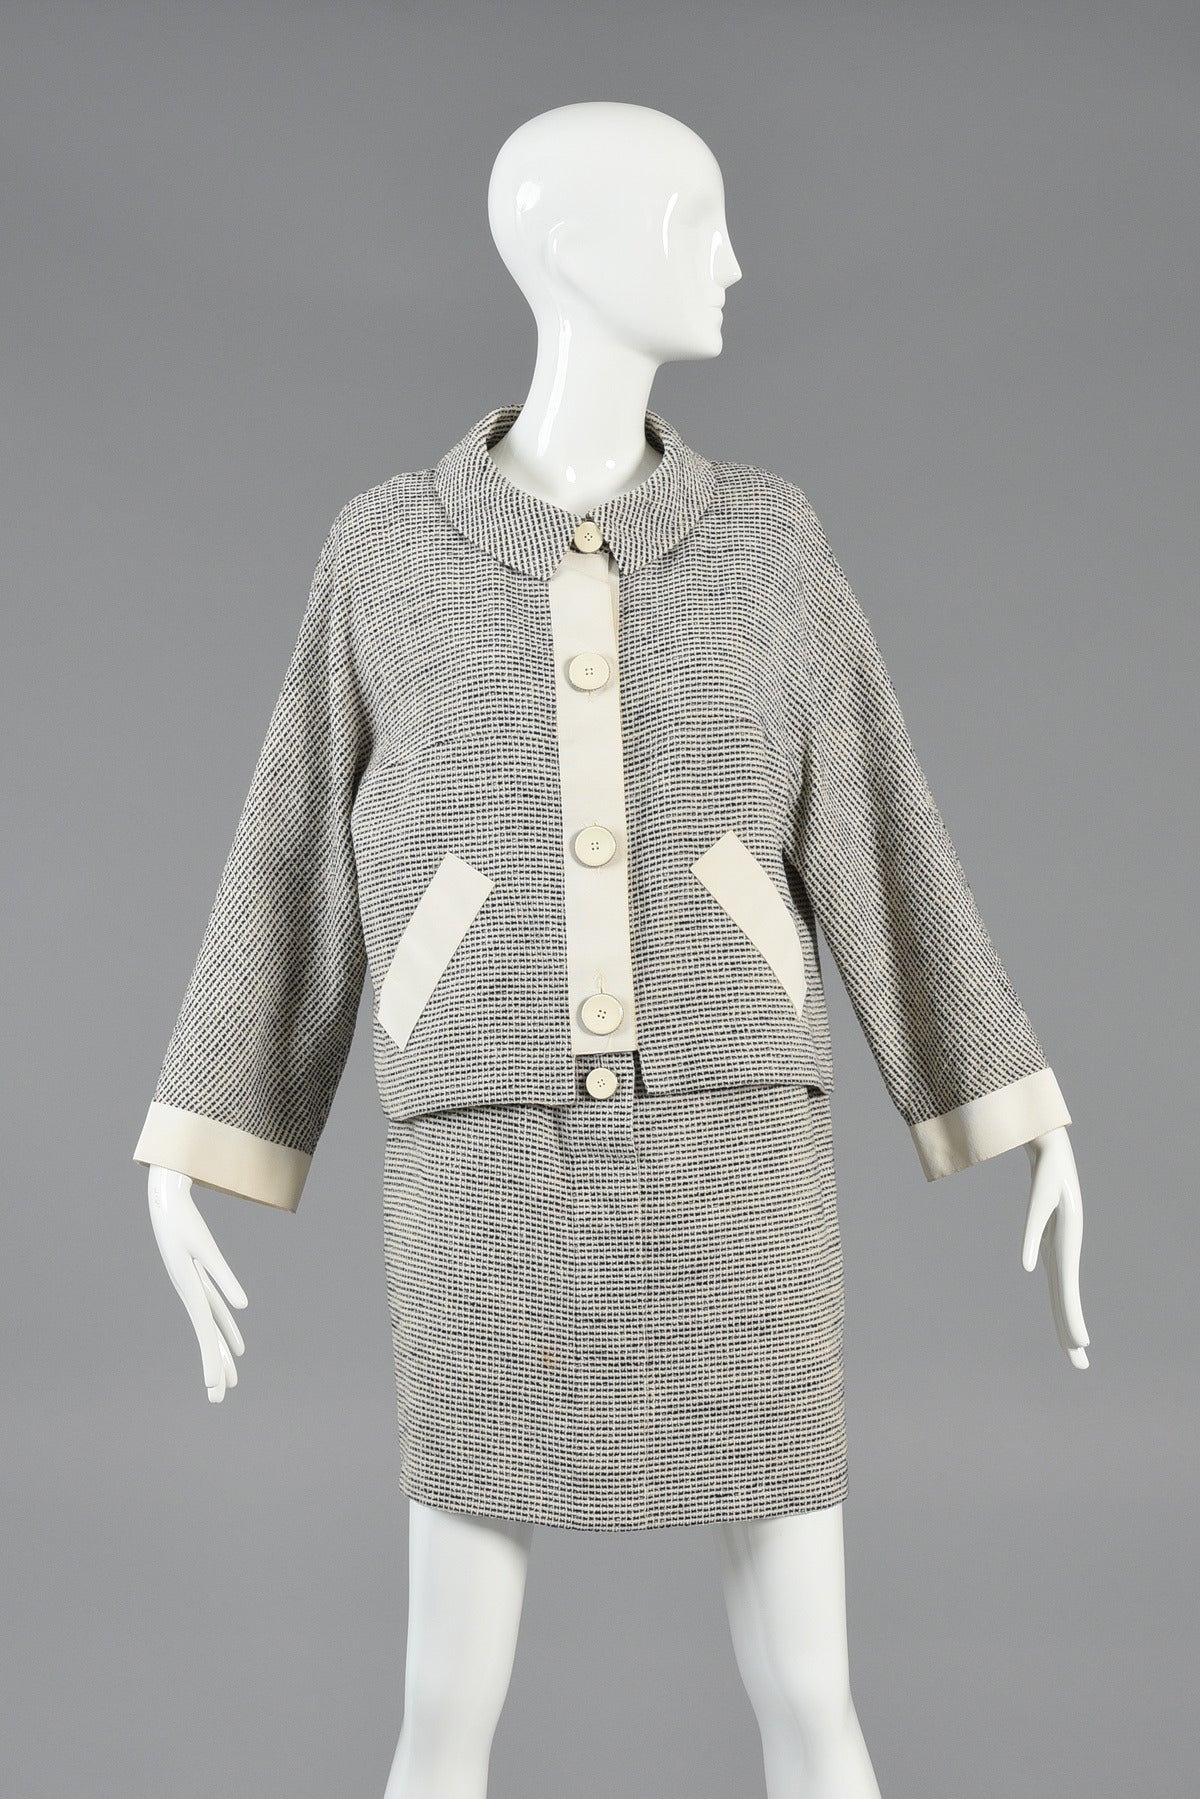 Gray Karl Lagerfeld 1990s Monochrome Sack Dress and Jacket For Sale